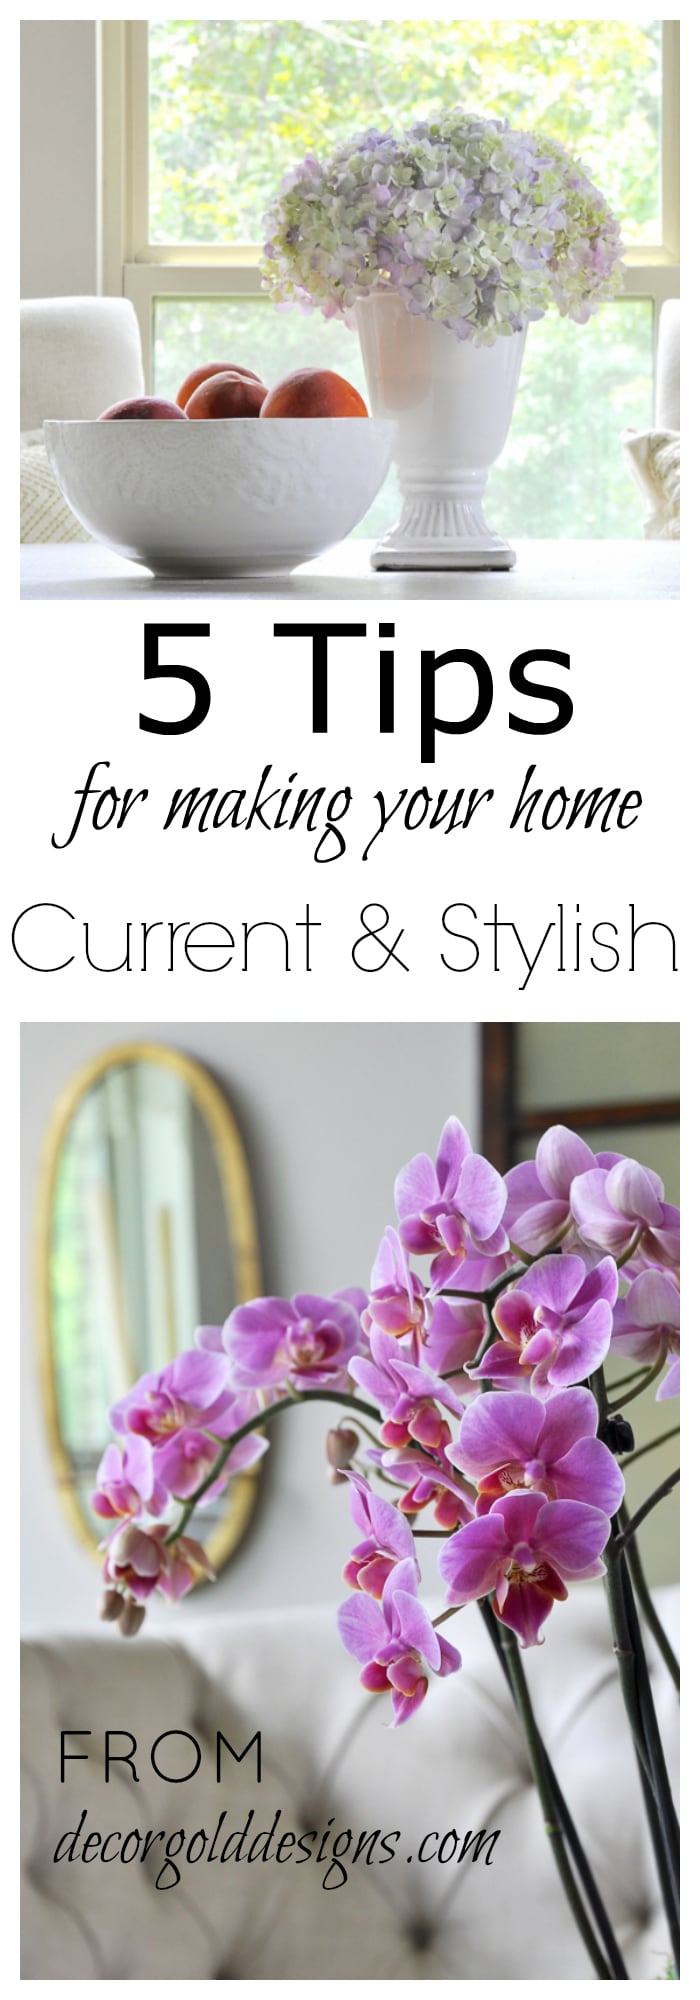 5 Tips for Making Your Home Current and Stylish: It is possible! And you don't have to kill yourself trying to make it happen... Don't miss these tips for a current, stylish home!